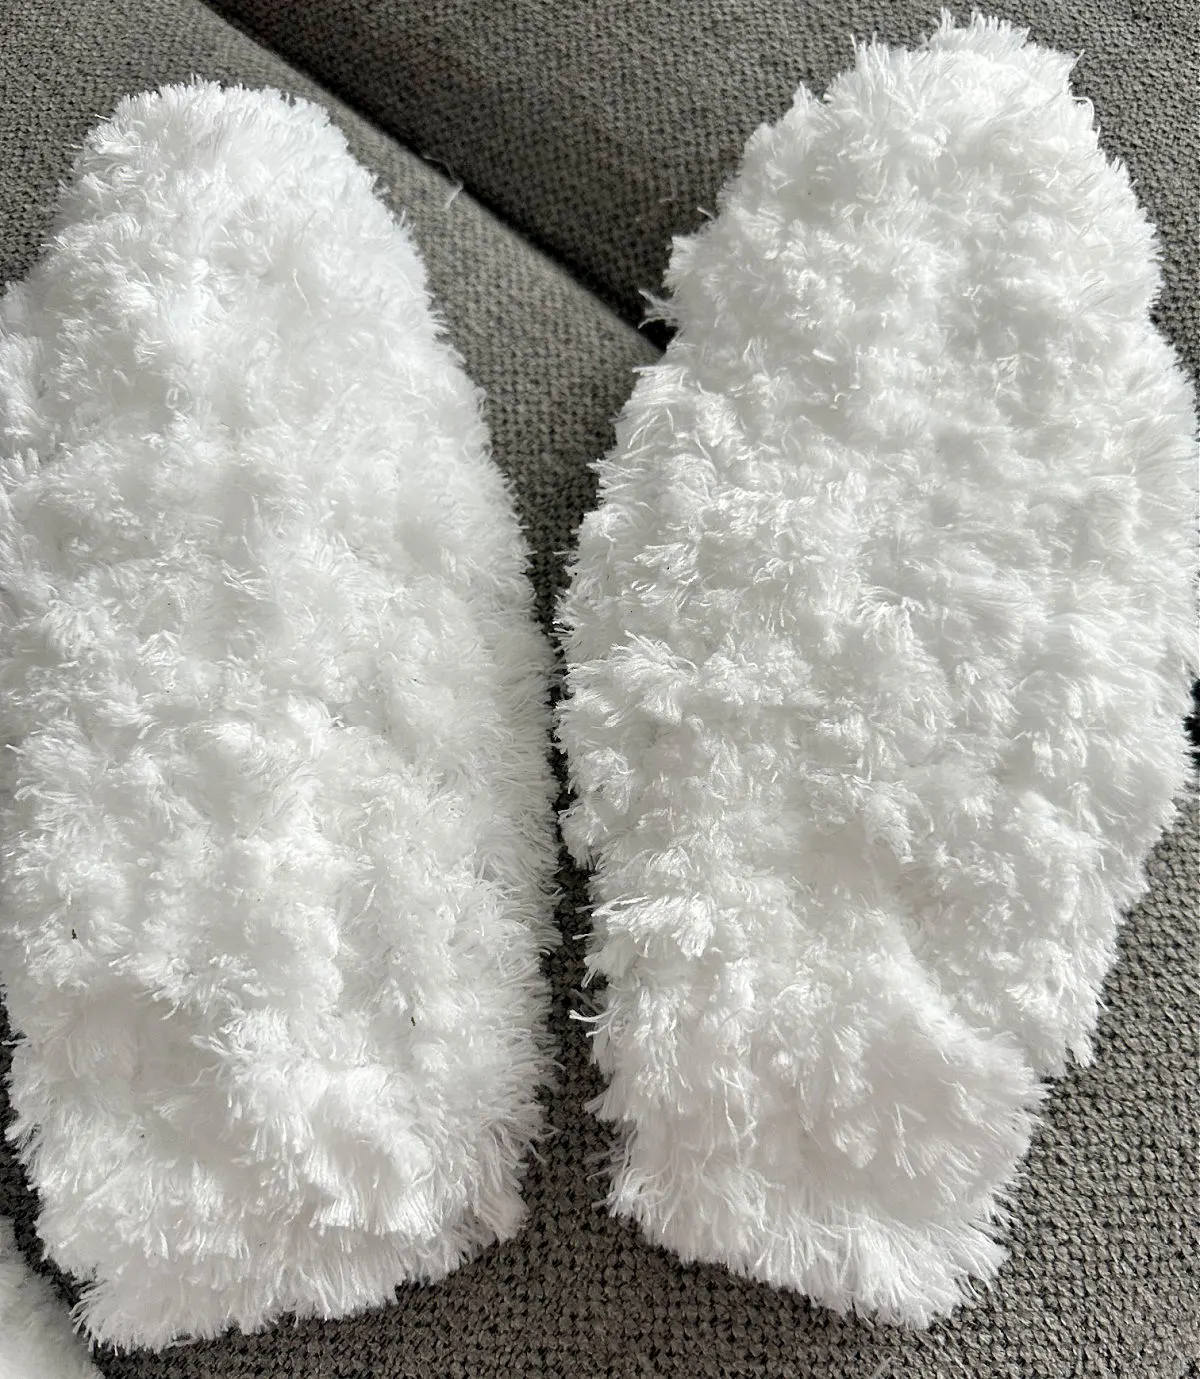 pair of bunny ears covered with mop heads